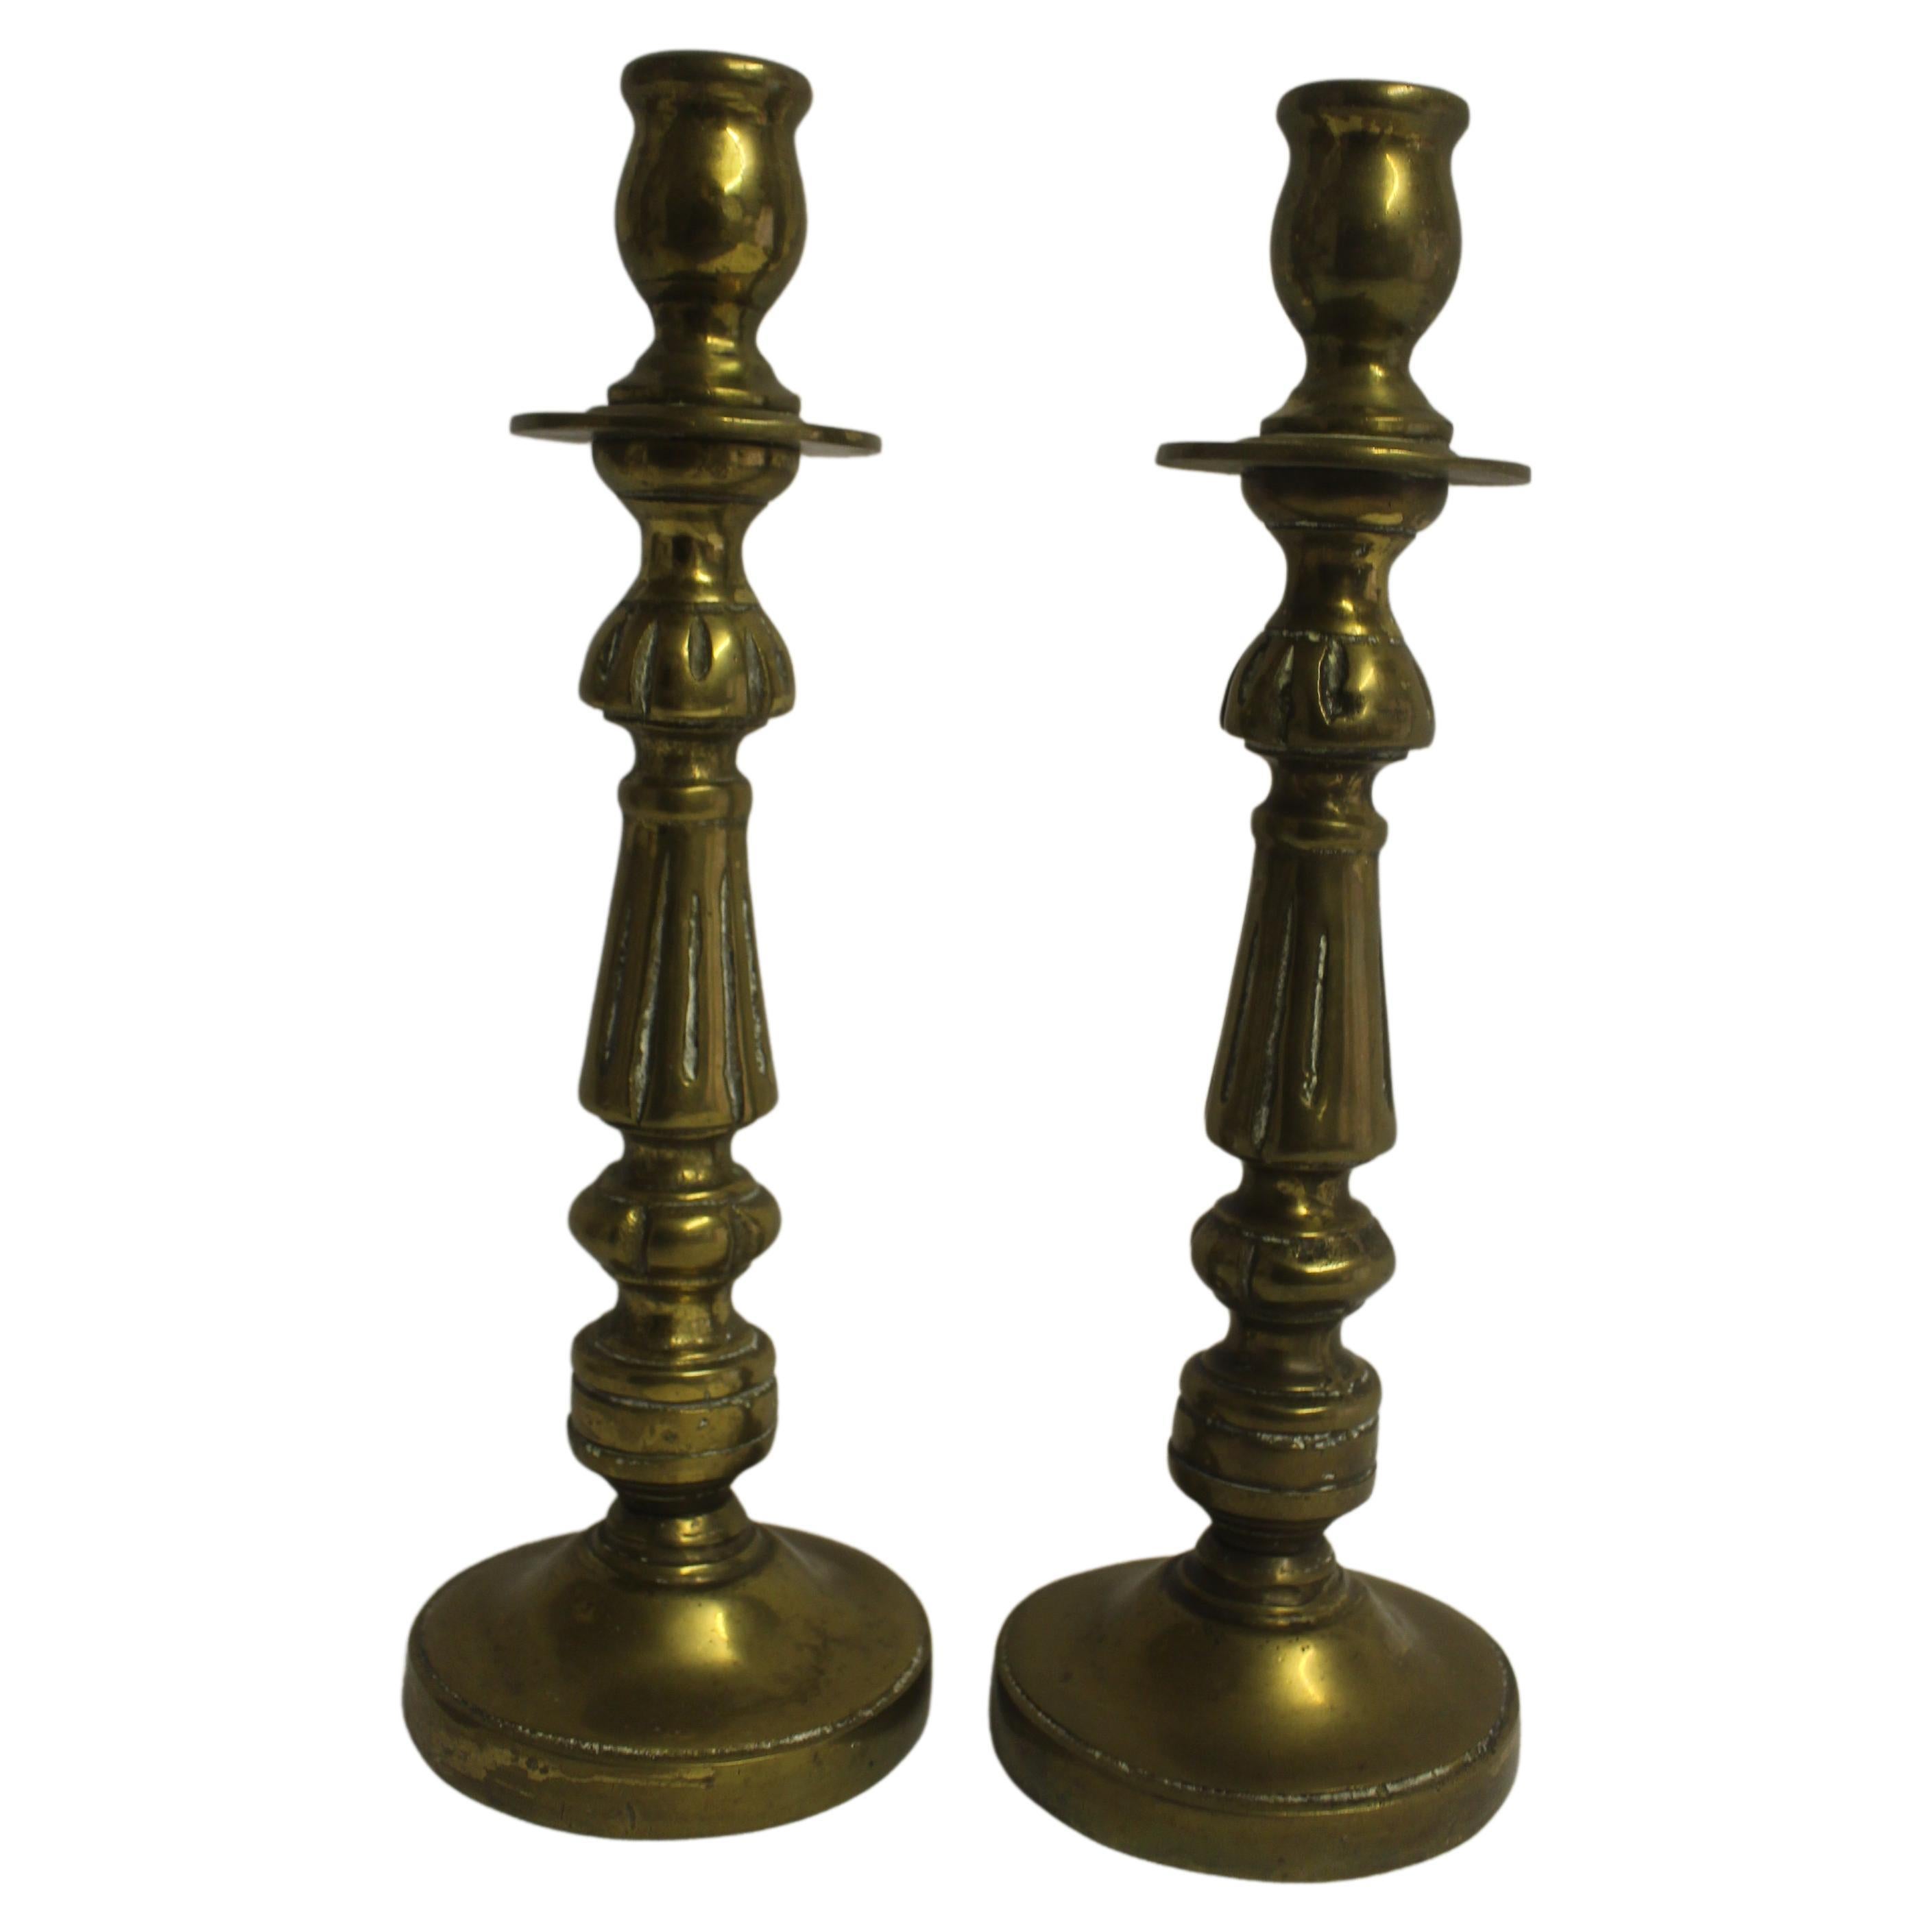 Pair of Heavy Italian Solid Brass Candle Holder, 19th C